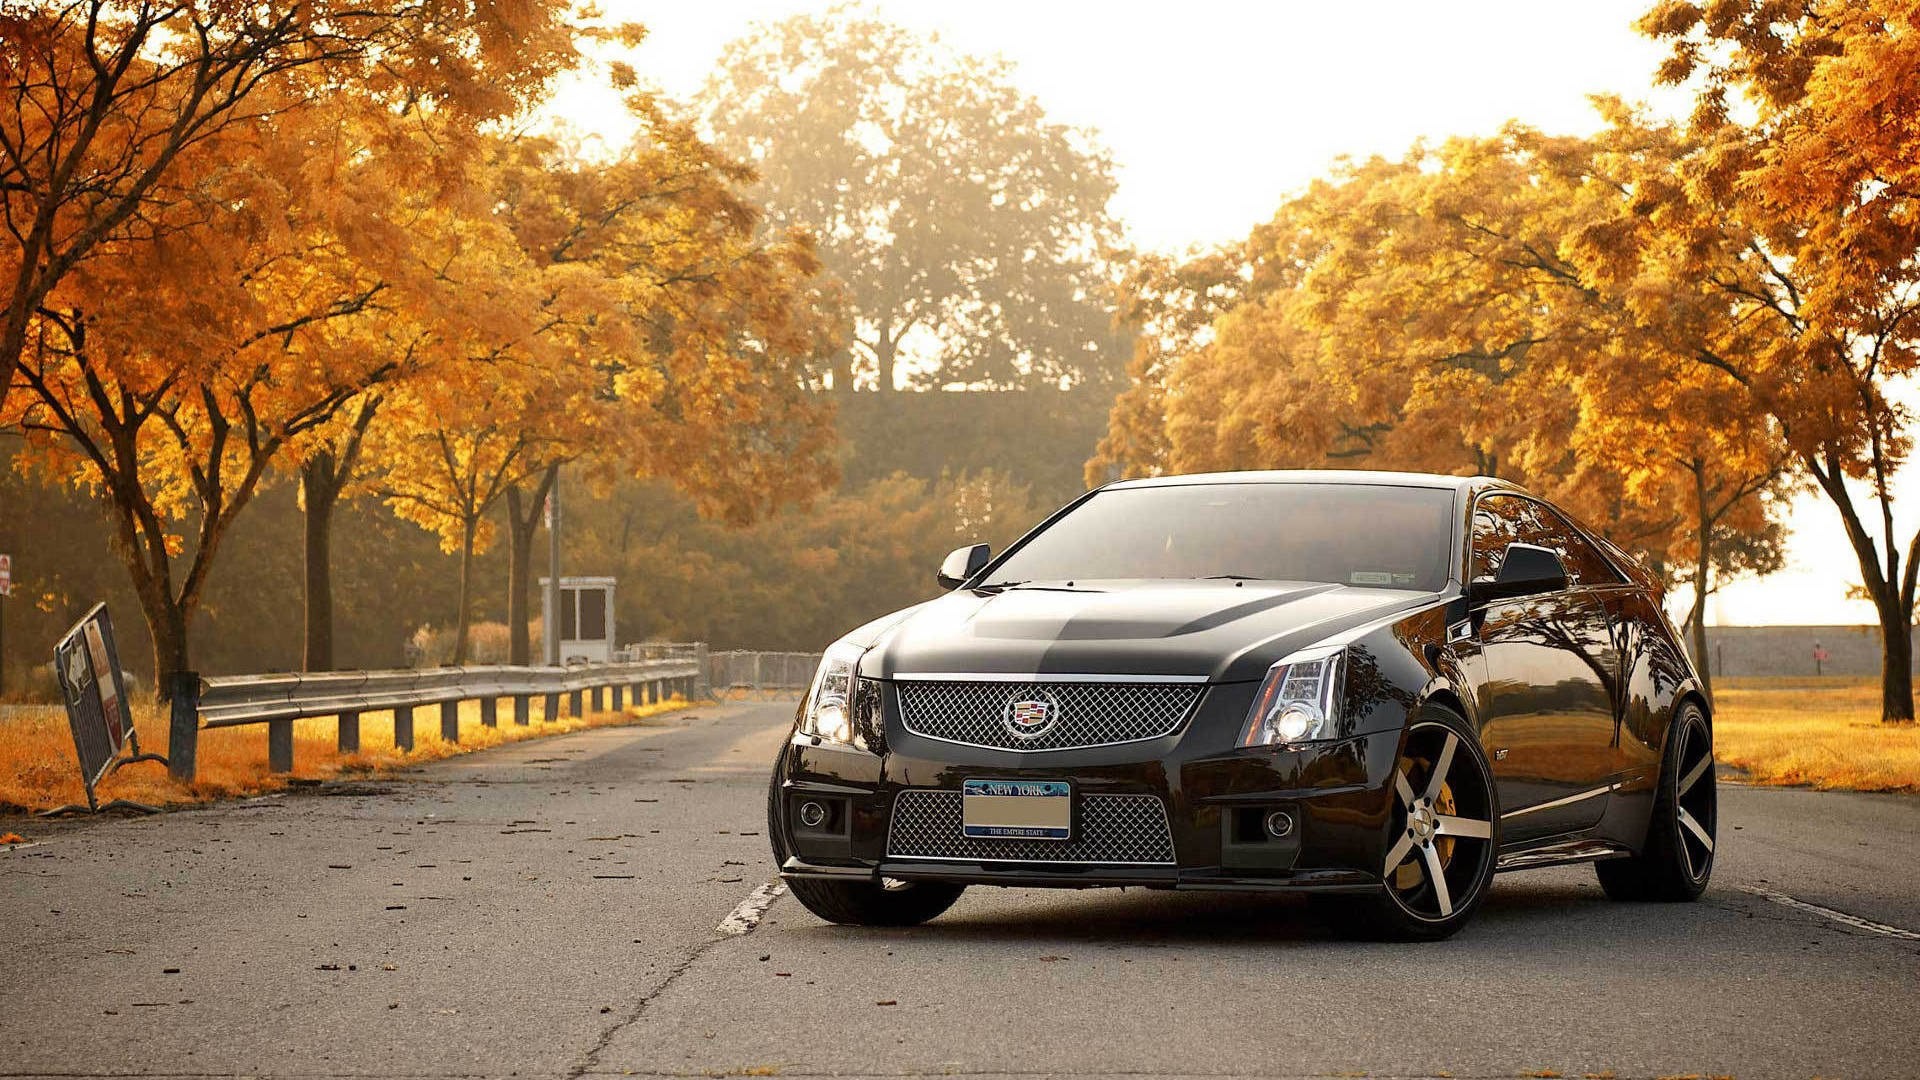 Super Collection Cadillac Wallpapers, 4k Ultra Hd Cadillac - Cadillac Cts V Wallpaper Hd - HD Wallpaper 